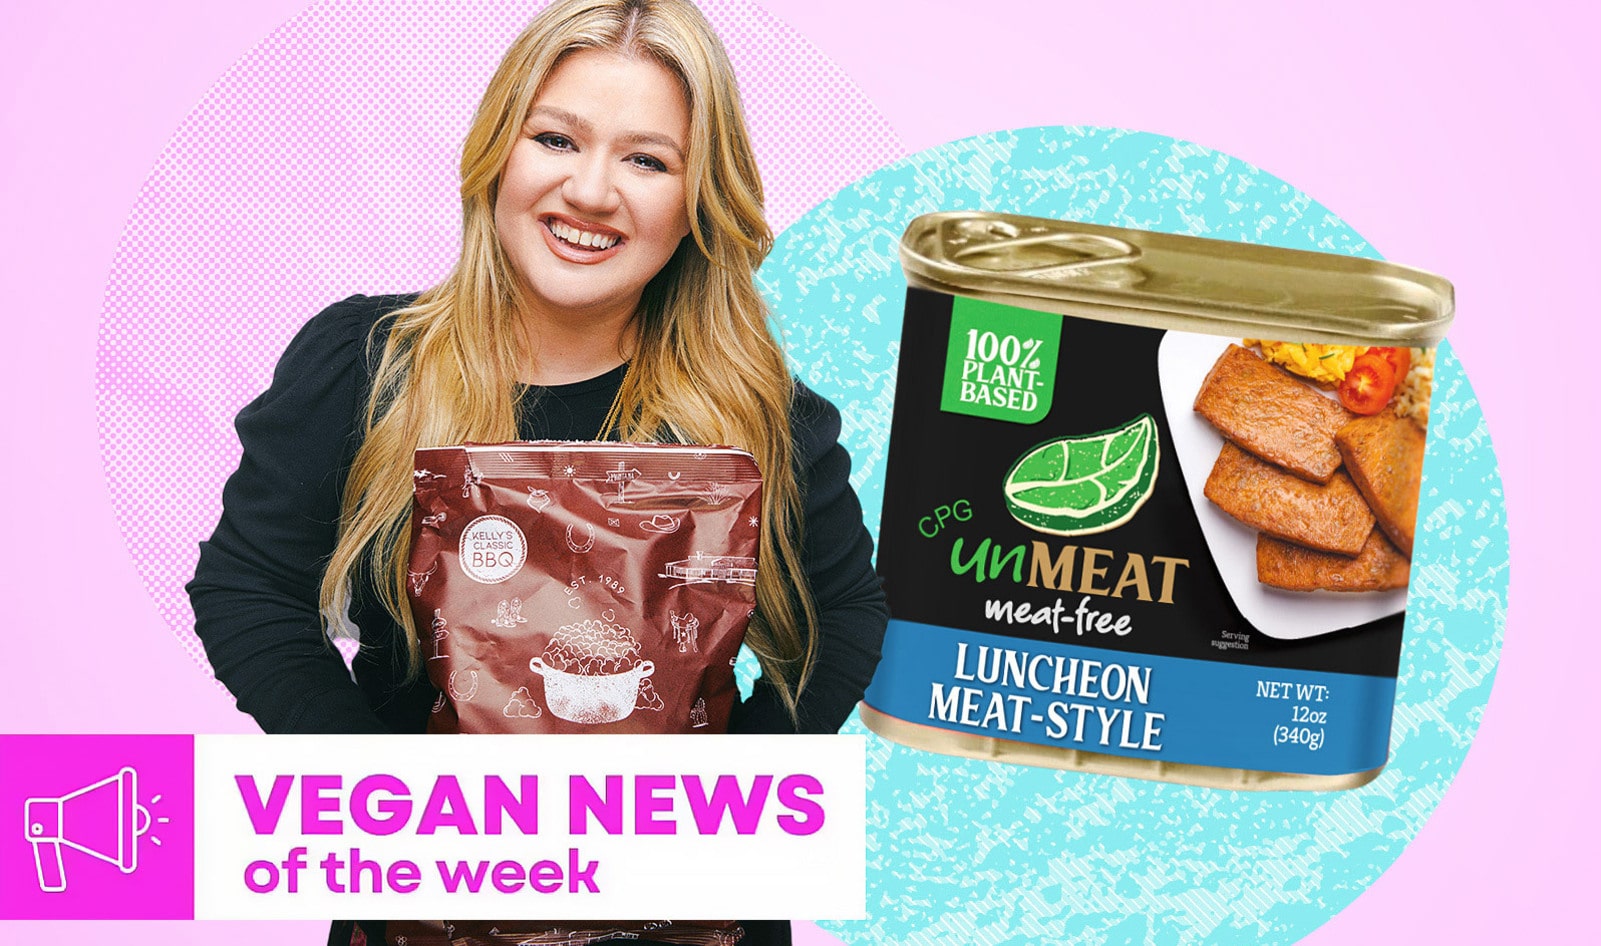 Kelly Clarkson’s Popcorn, New Spam at Walmart, and More Vegan Food News of the Week